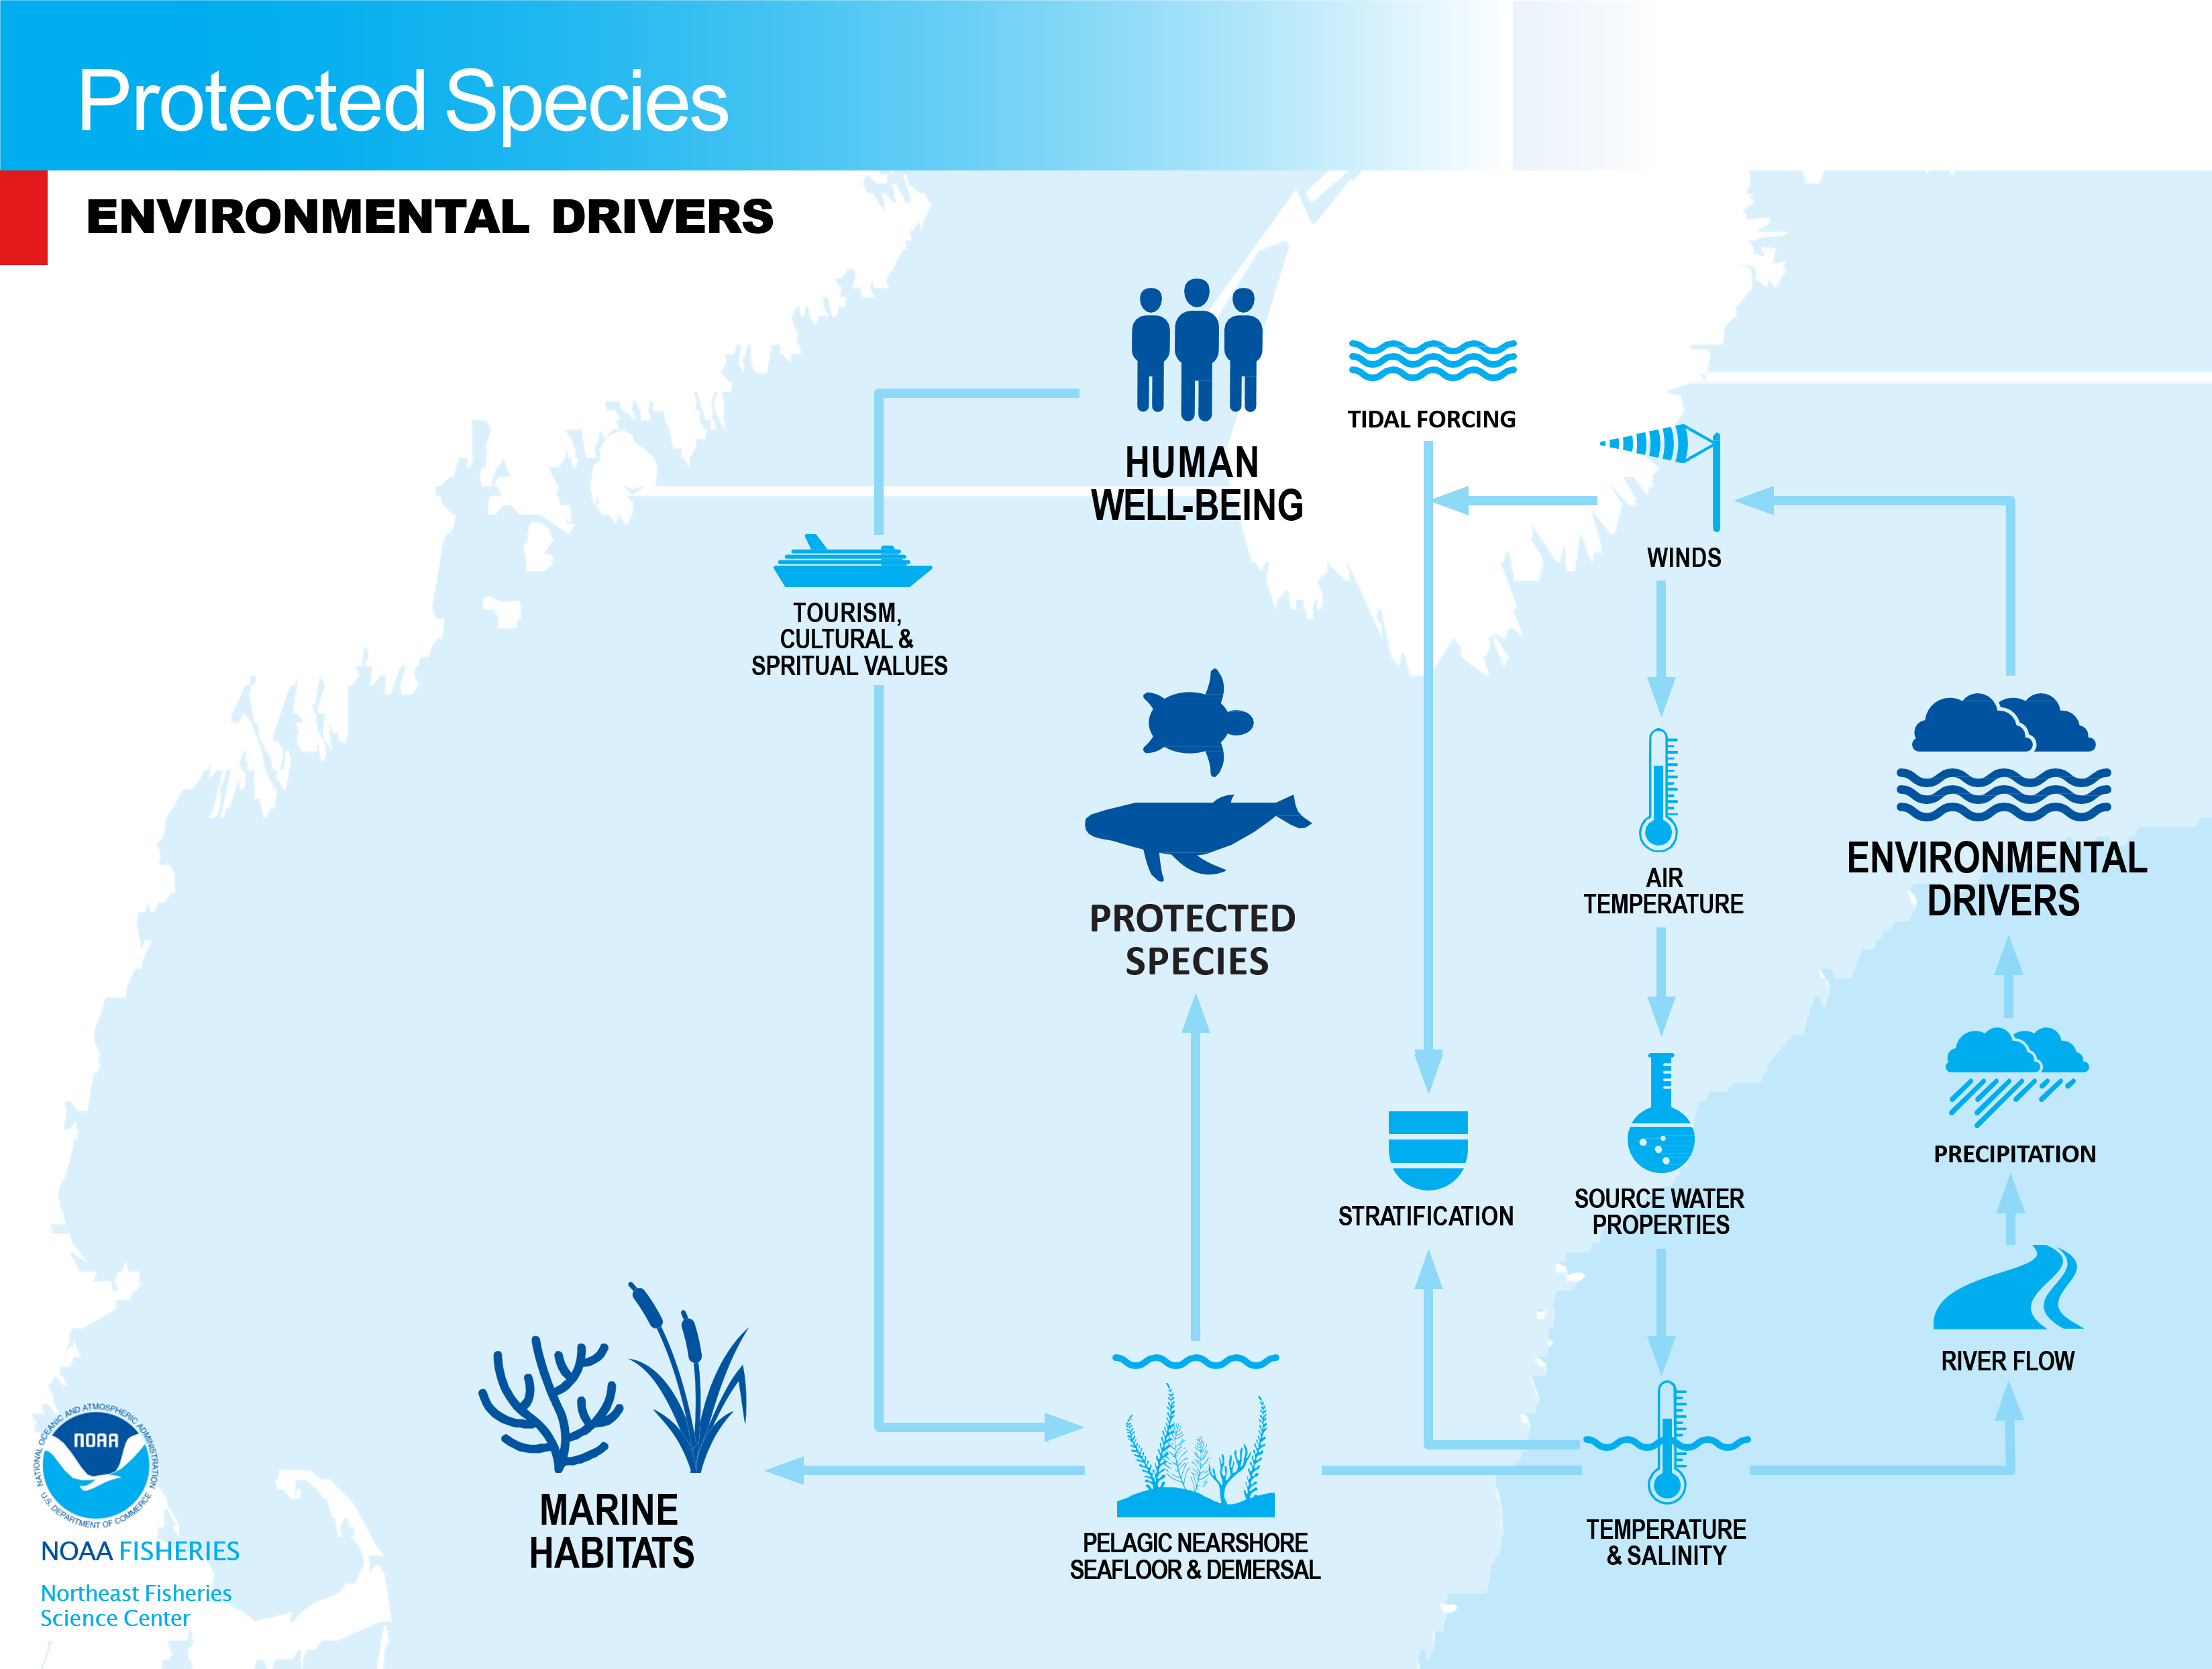 Conceptual model of protected species environmental drivers in the NE-LME.